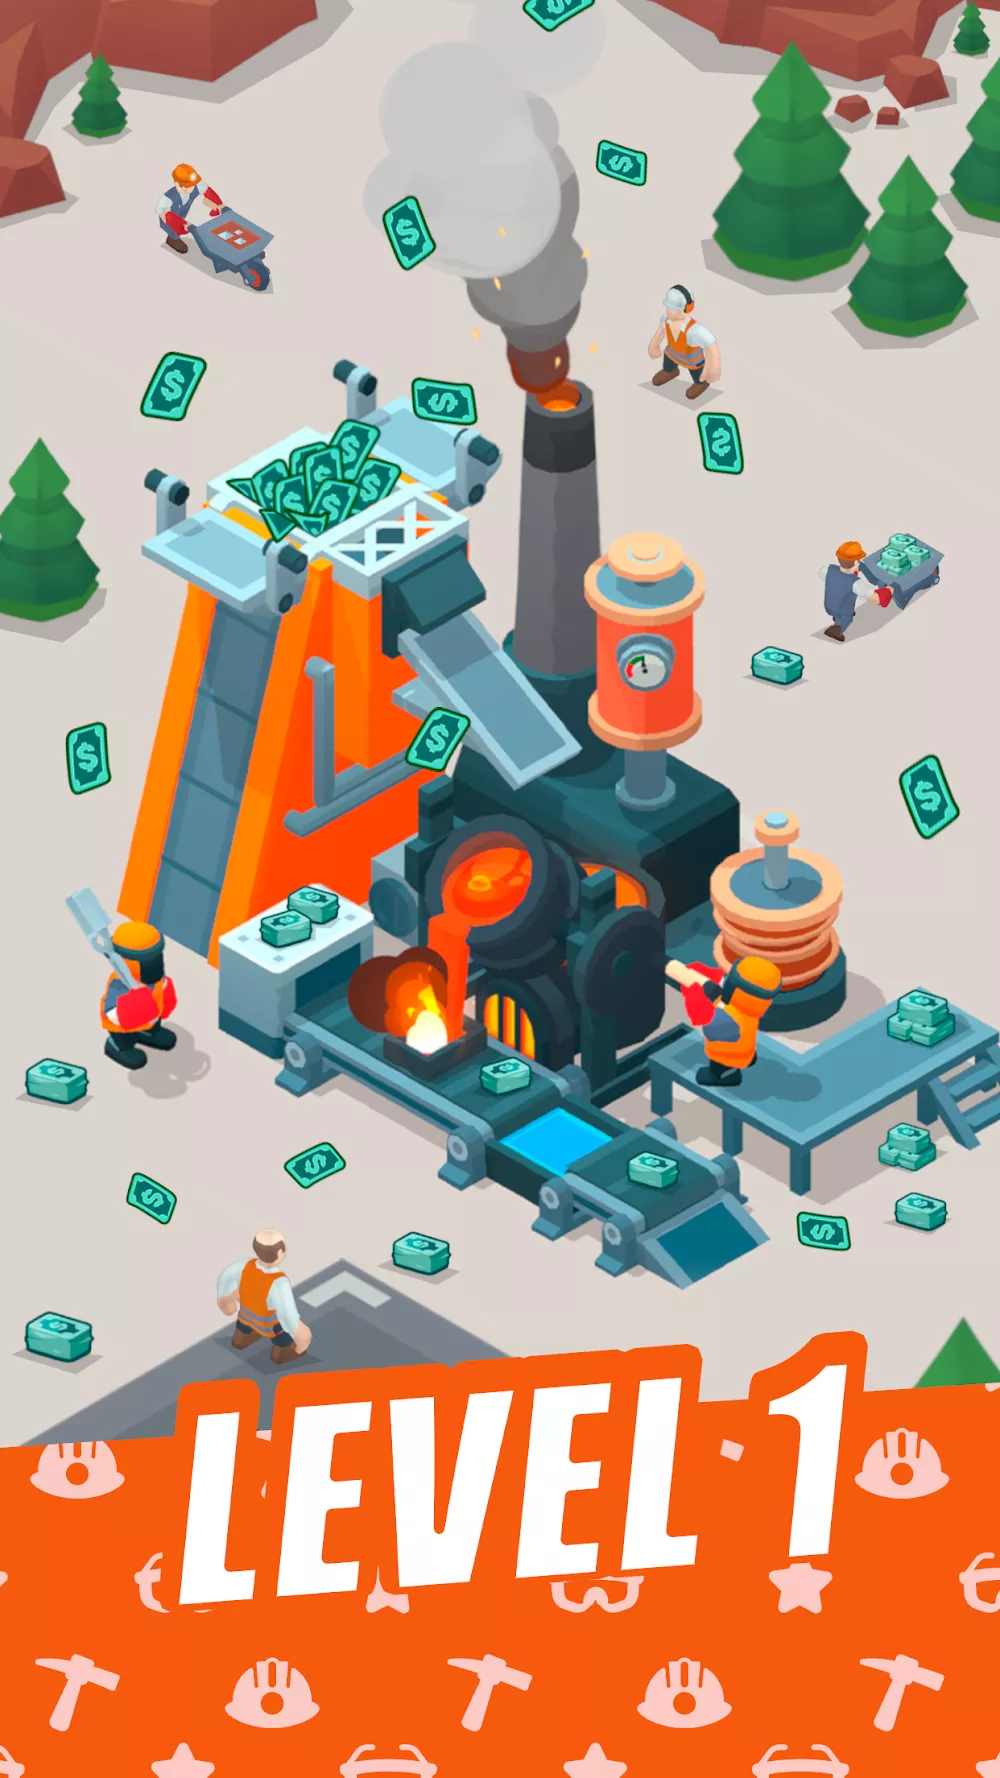 Metal Empire: Idle Factory Inc